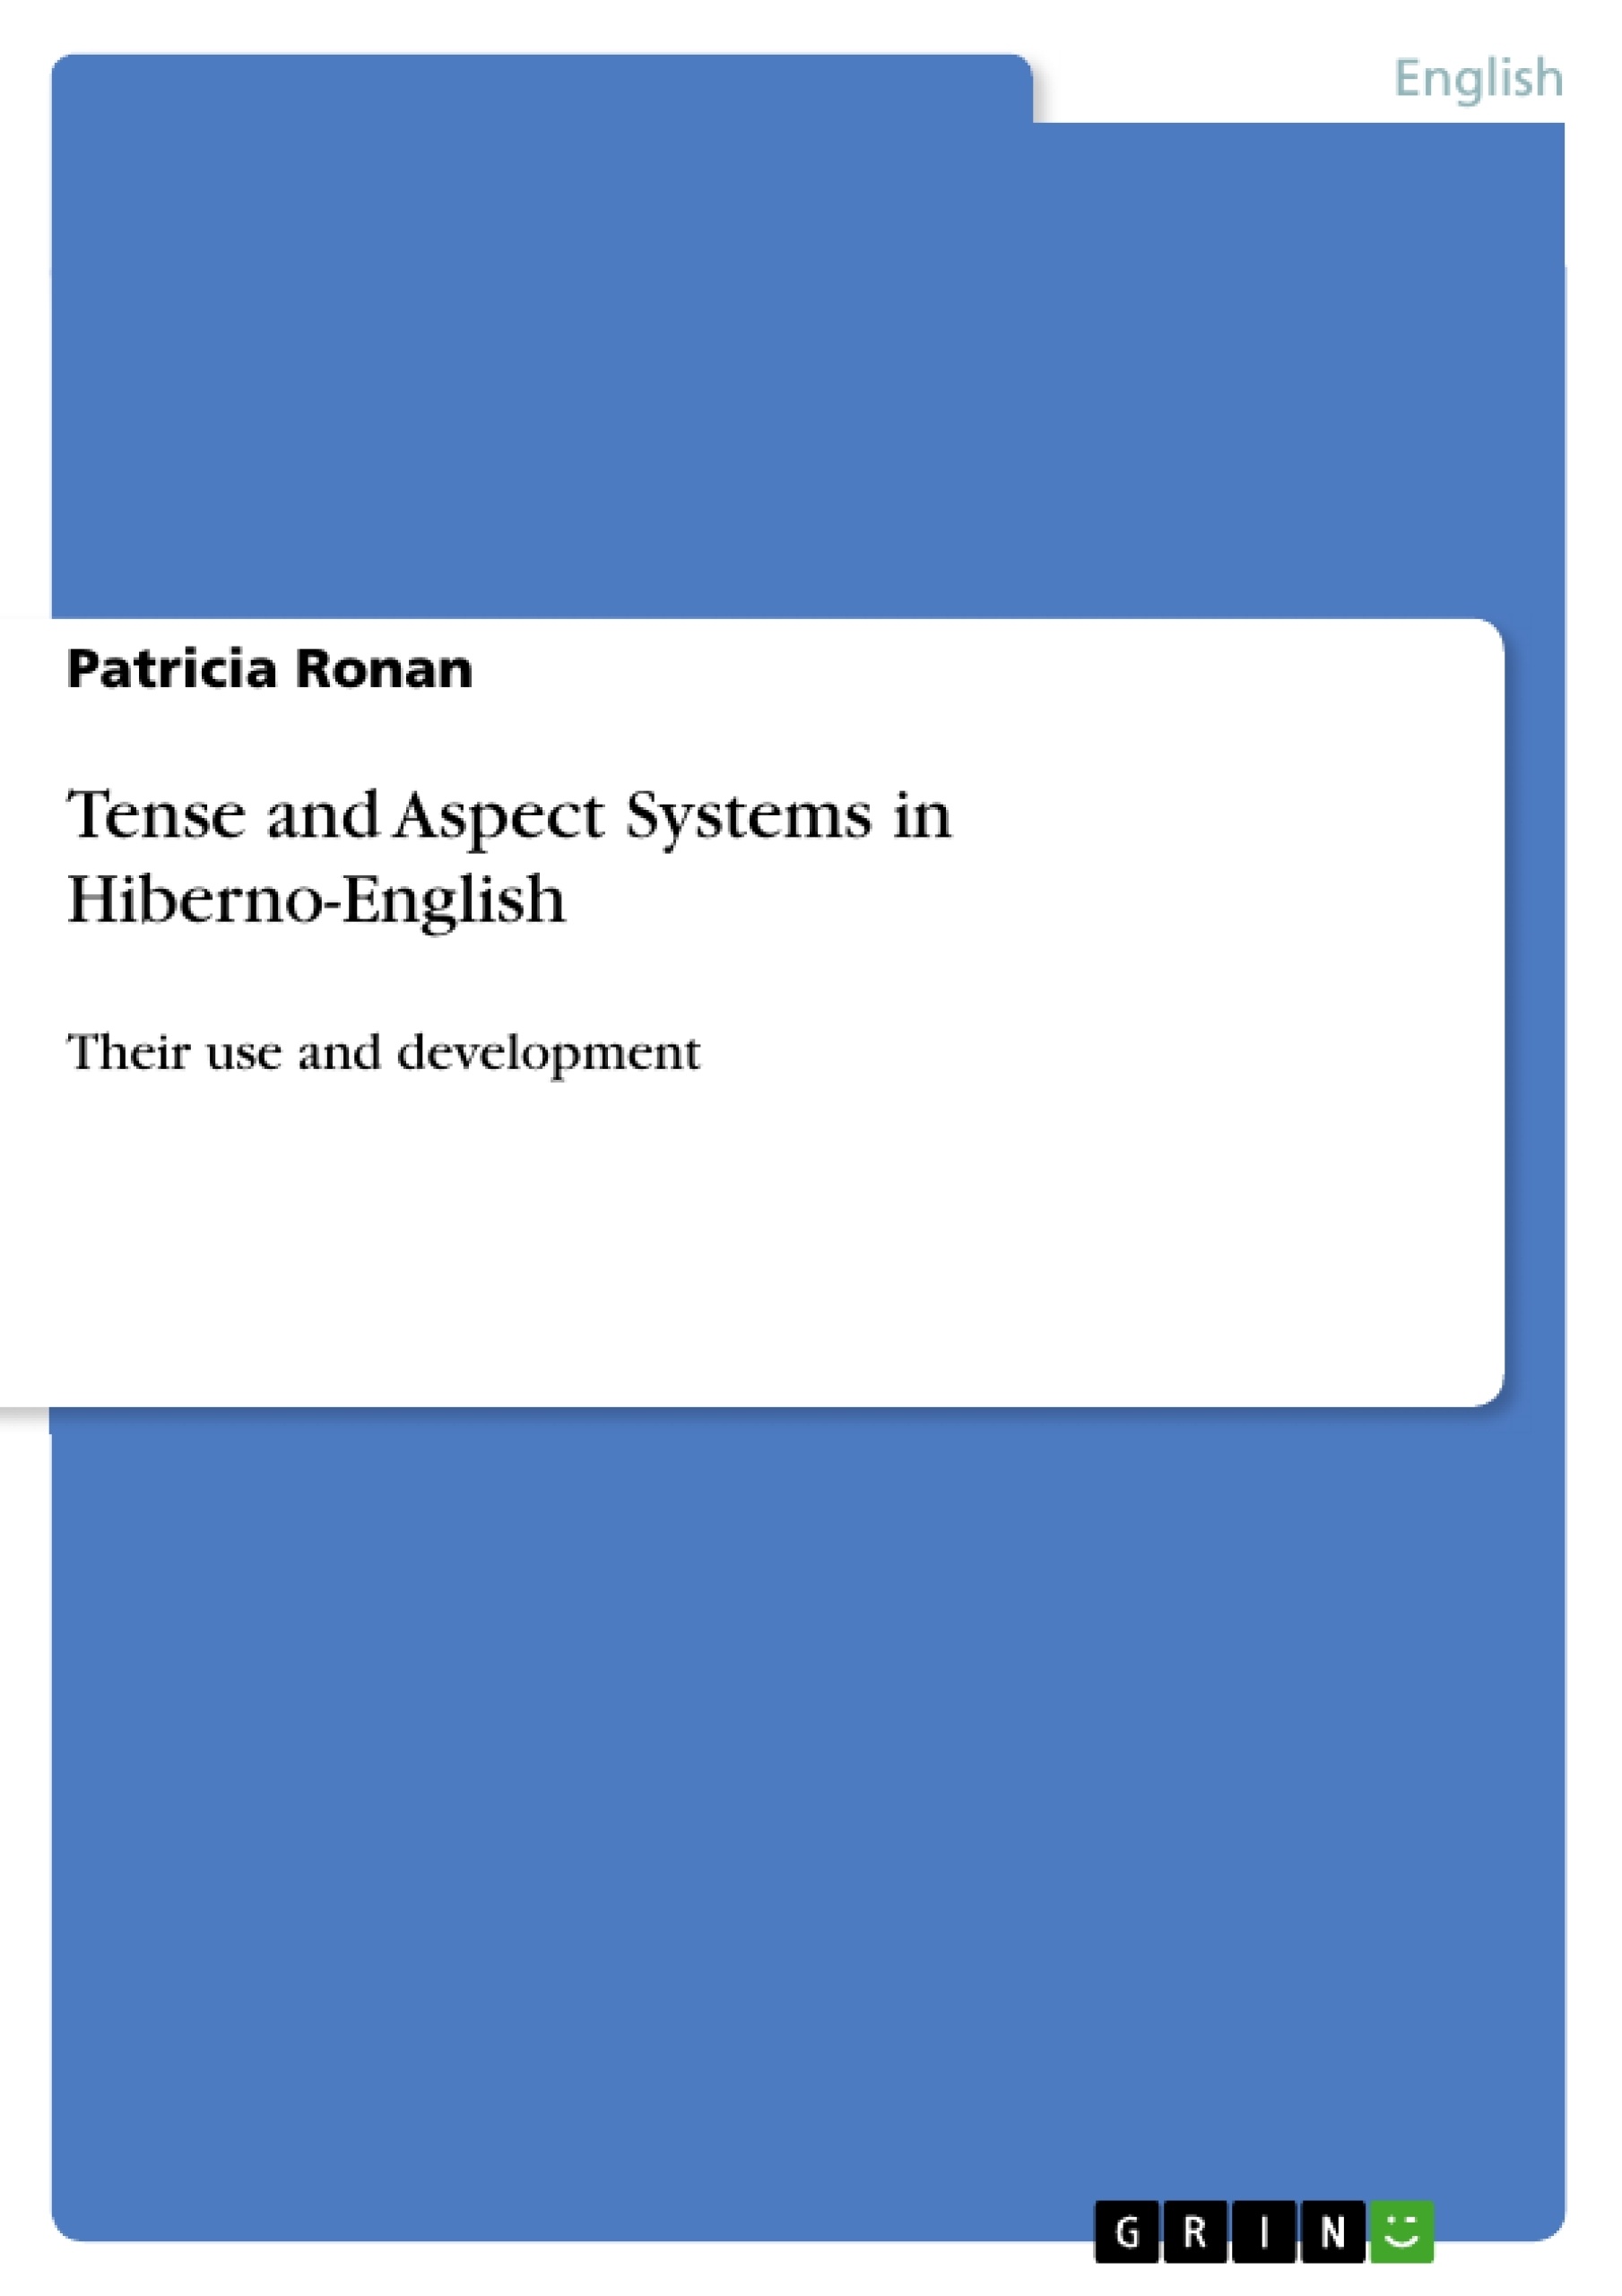 Title: Tense and Aspect Systems in Hiberno-English